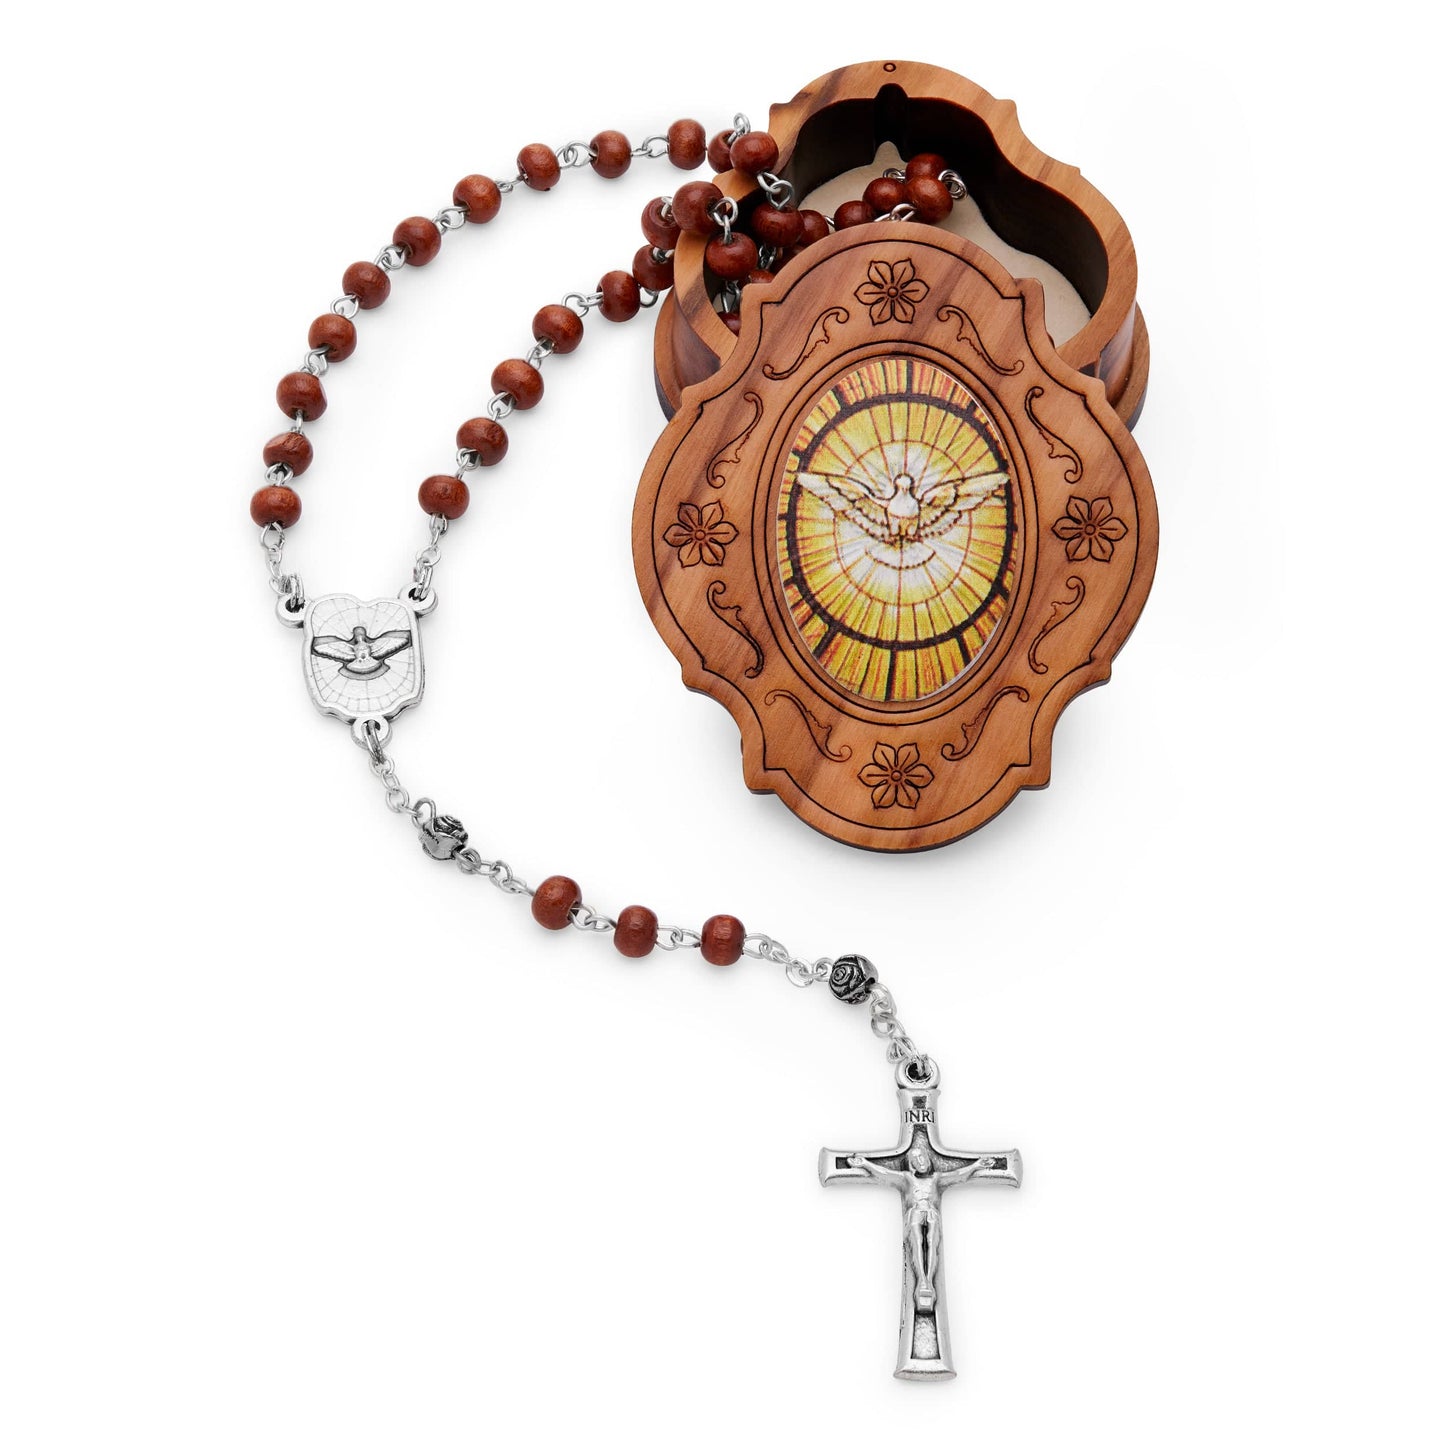 MONDO CATTOLICO Prayer Beads 38 cm (15 in) / 4 mm (0.15 in) Olive Wood Case and Wooden Rosary of the Holy Spirit